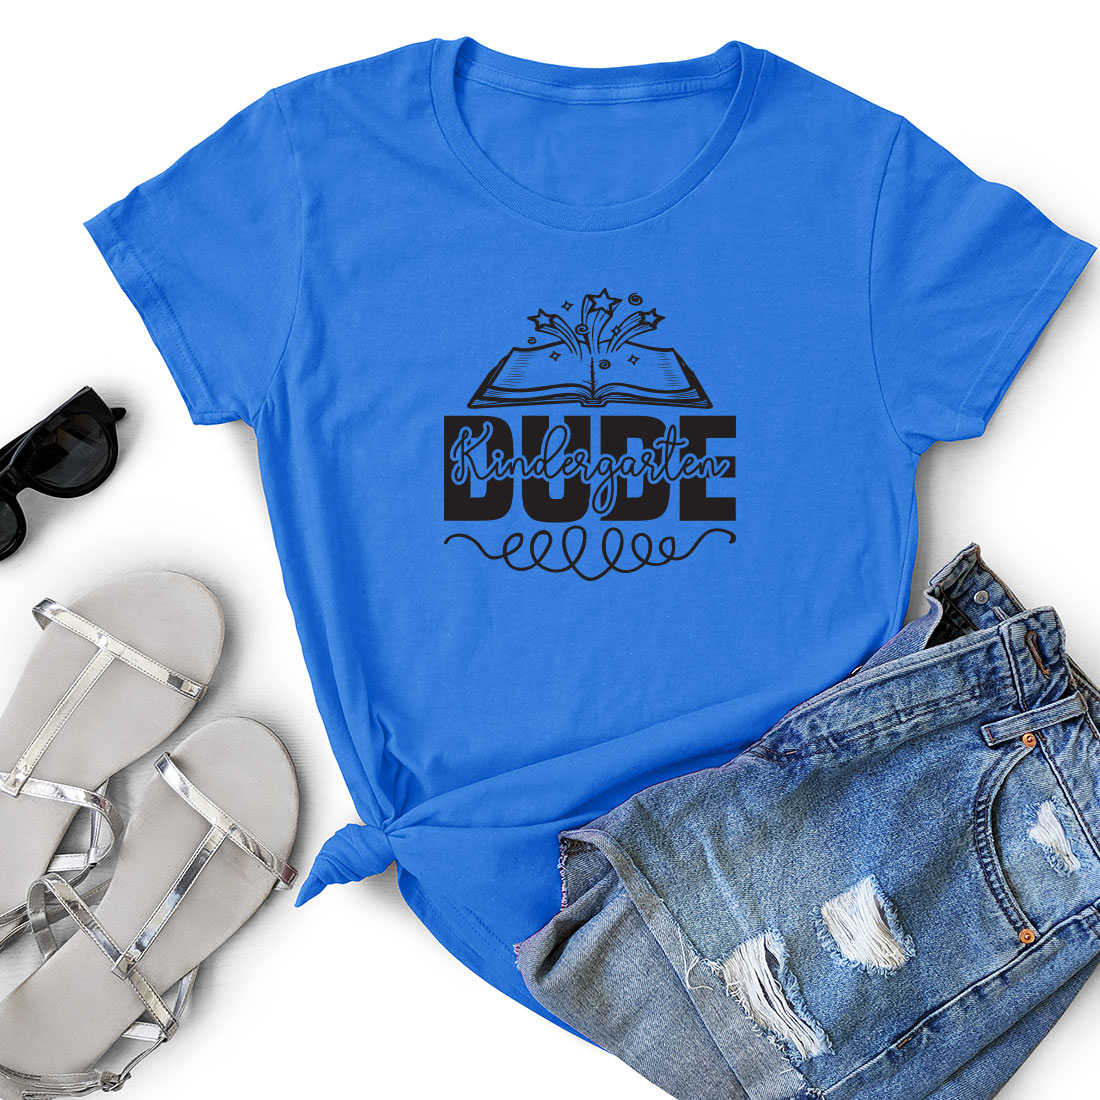 Blue t - shirt with a book and a pair of shorts next to it.